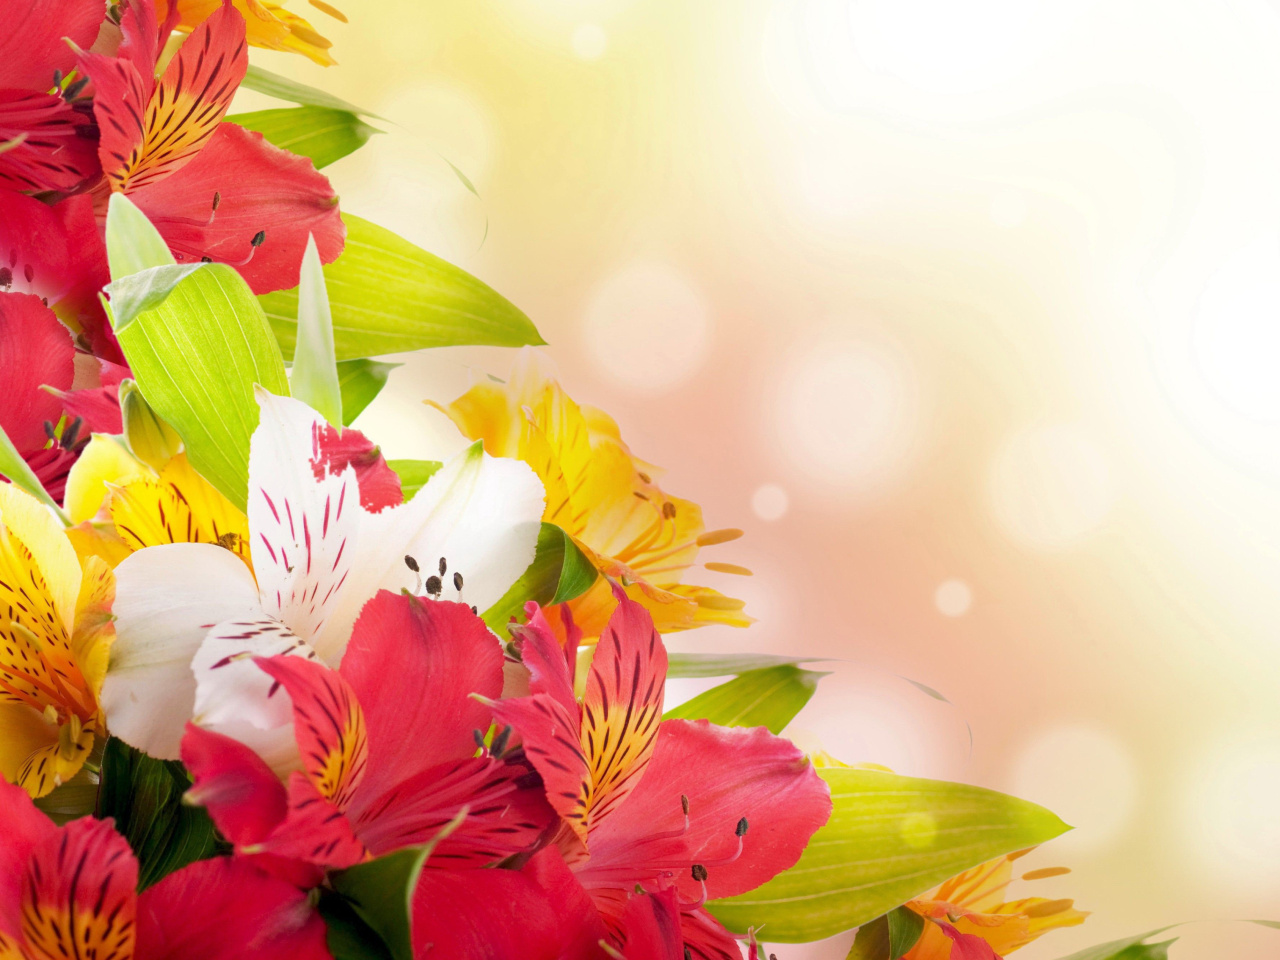 Das Flowers for the holiday of March 8 Wallpaper 1280x960